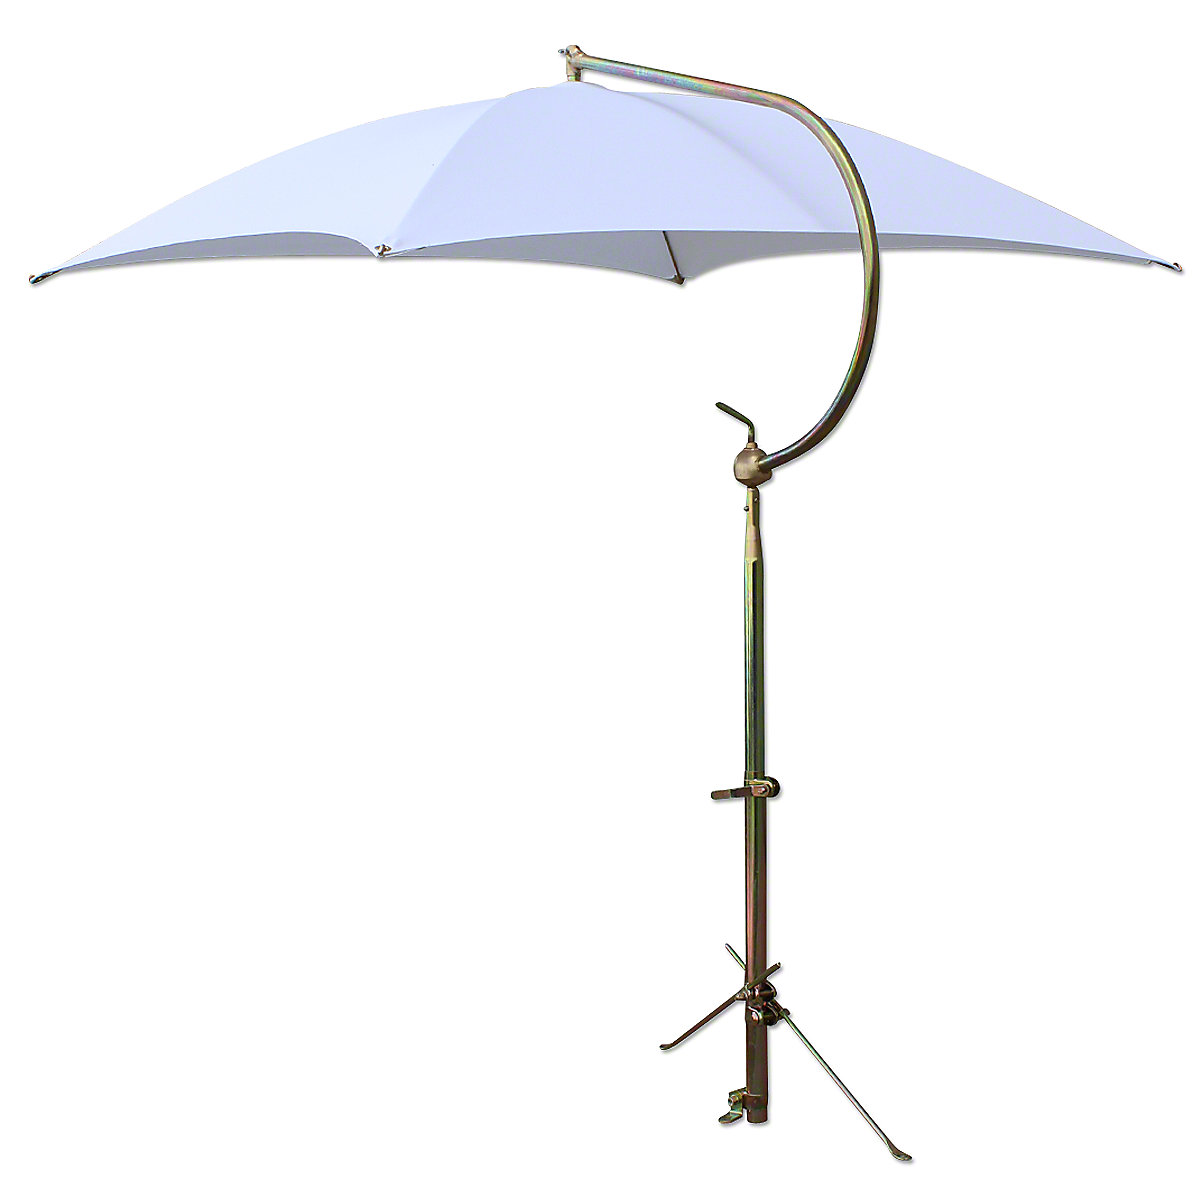 Deluxe White Umbrella With Brackets For Massey Harris And Massey Ferguson Tractors.